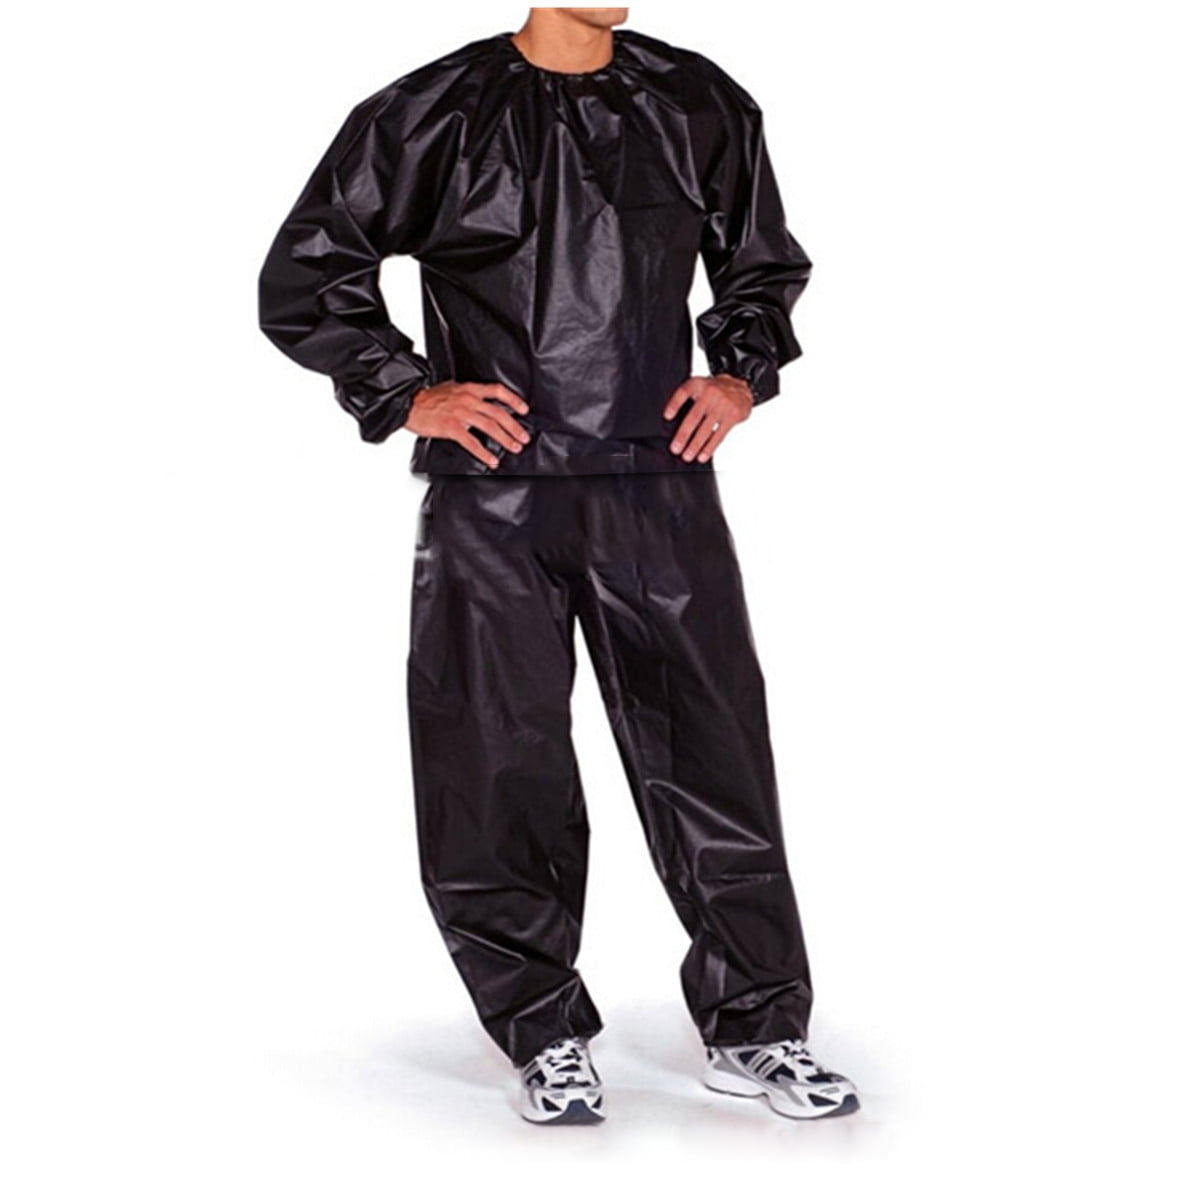 Sauna Body Sweat Suit For Men Women Unisex Weight Aid For Fat Loss Lose Weight 